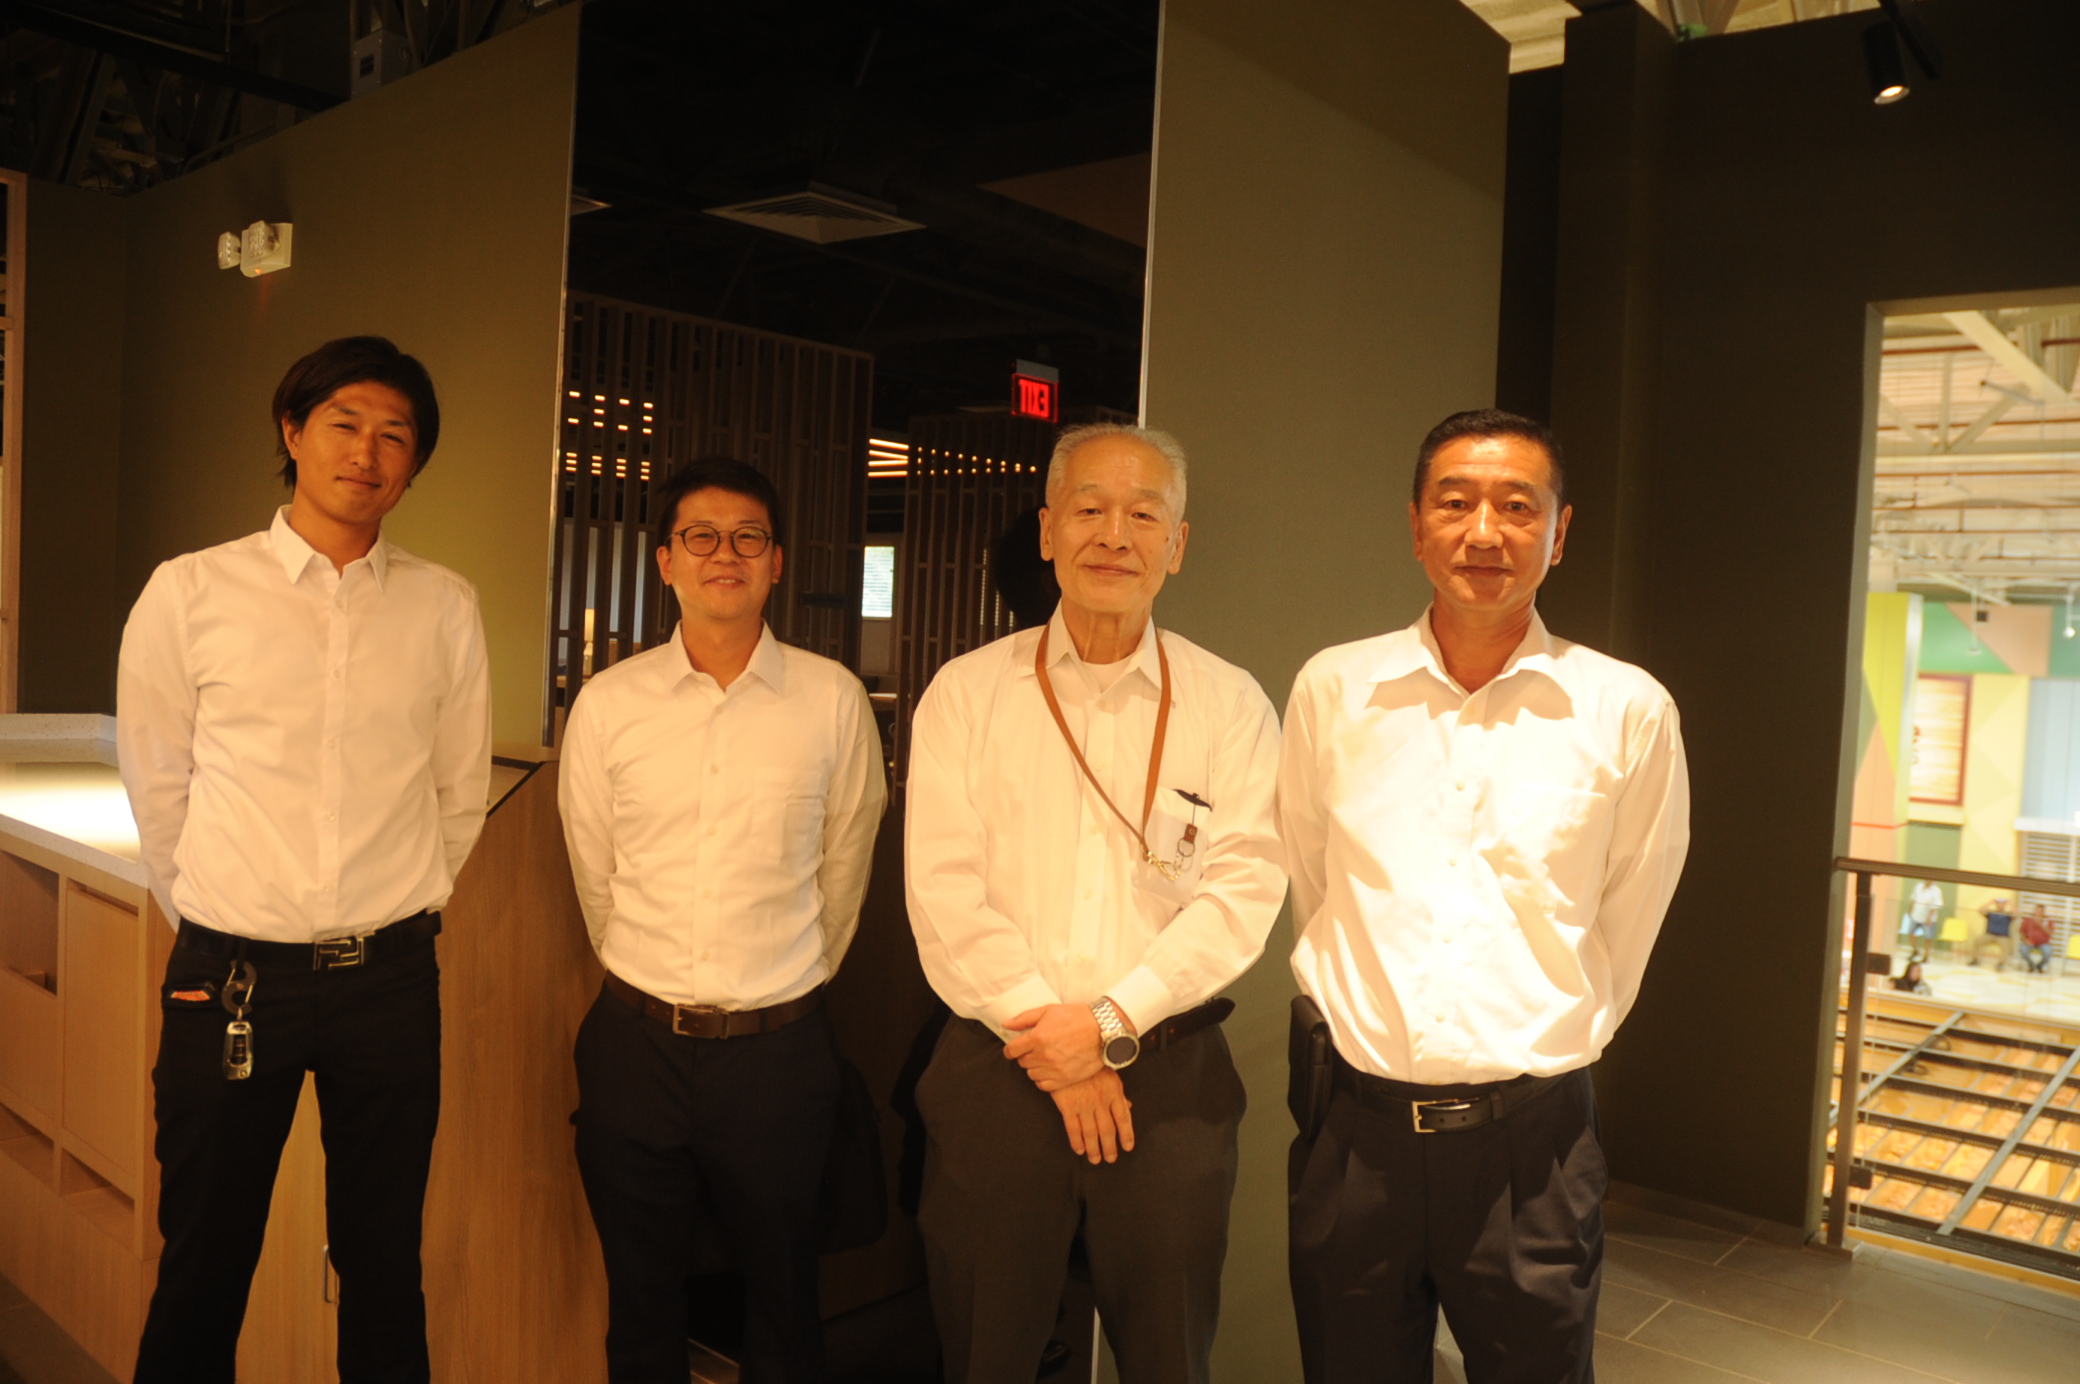 (From left) Shun Hirata, senior project manager; Ryoichi Hayashi, project manager; Yasuyuki Inoue; senior managing executive officer and CEO, International Division; and Tomeyoshi Tachibana; general manager- Guam and Saipan Branch Office; all with Kinden Corp.